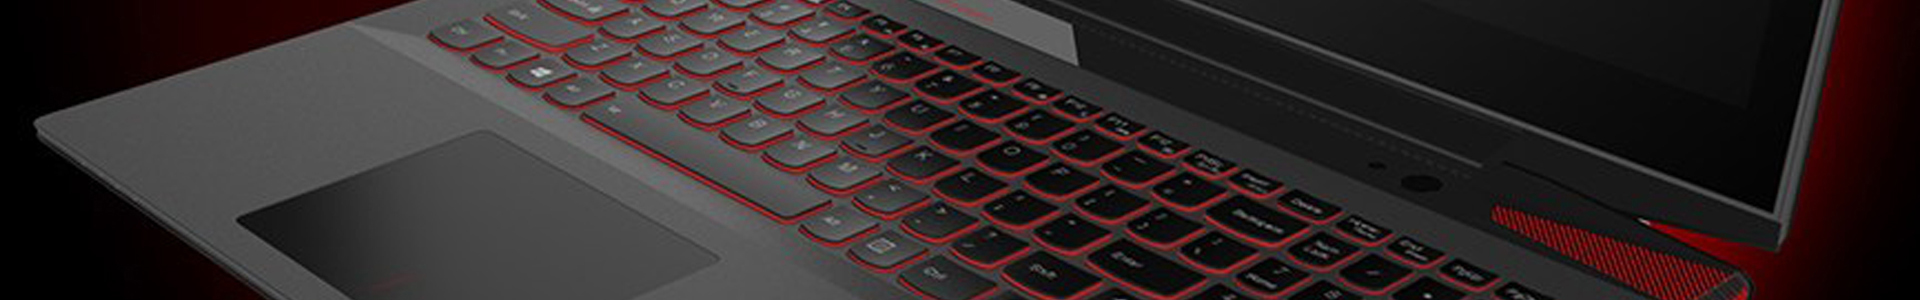 lenovo Laptop spares and accessories in Chennai